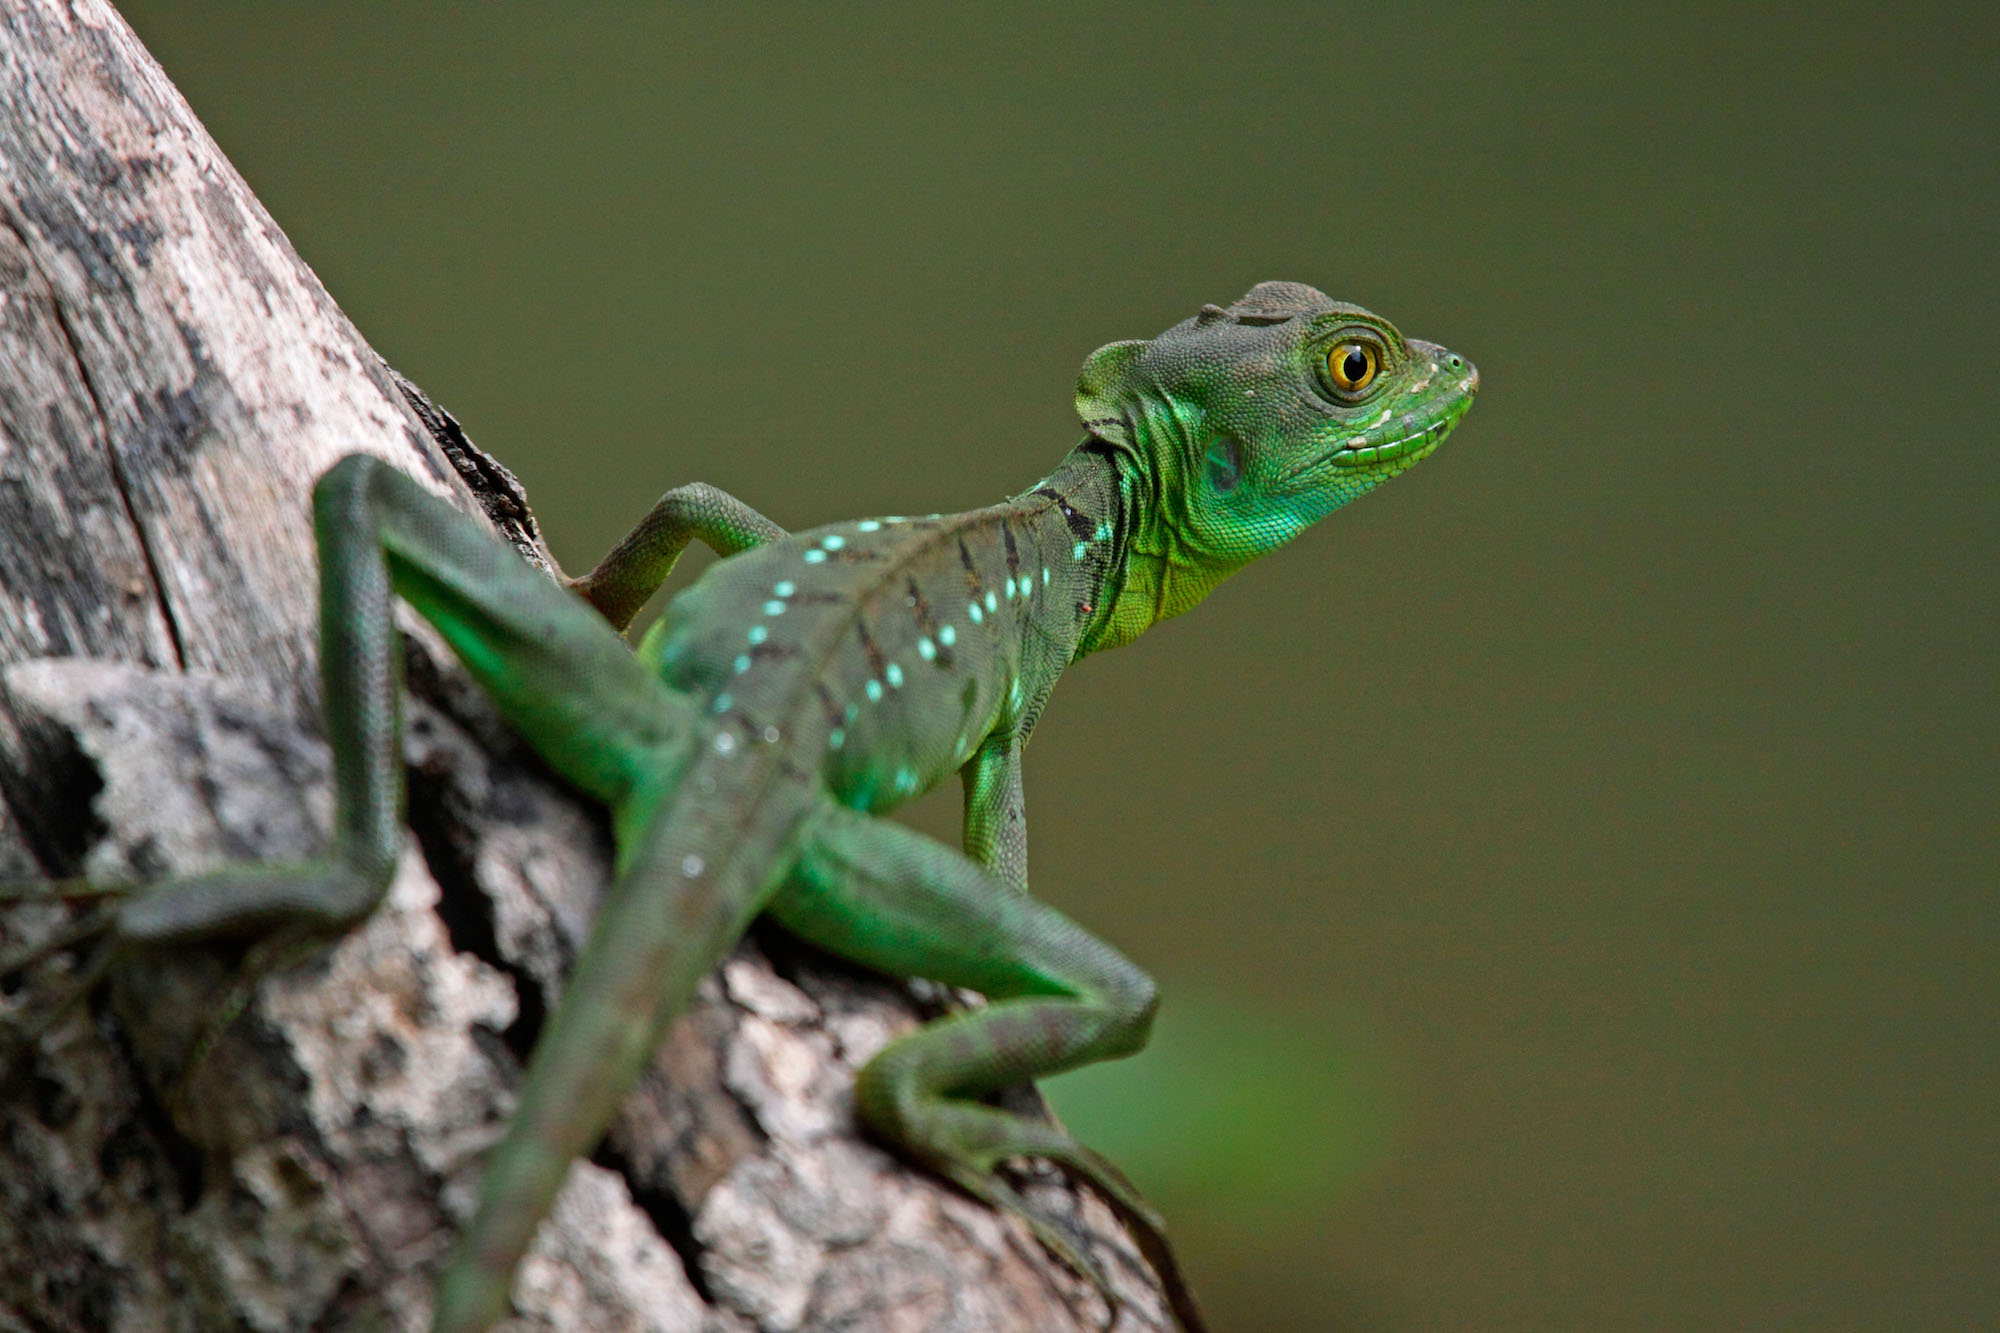 <p>A juvenile Green Basilisk in Costa Rica&#8217;s Tortuguero National Park. New global targets to protect the world&#8217;s flora and fauna will be thrashed out at COP15 in Kunming, China, later this year (image: <span id="automationNormalName">Adrian hepworth</span> / Alamy)</p>